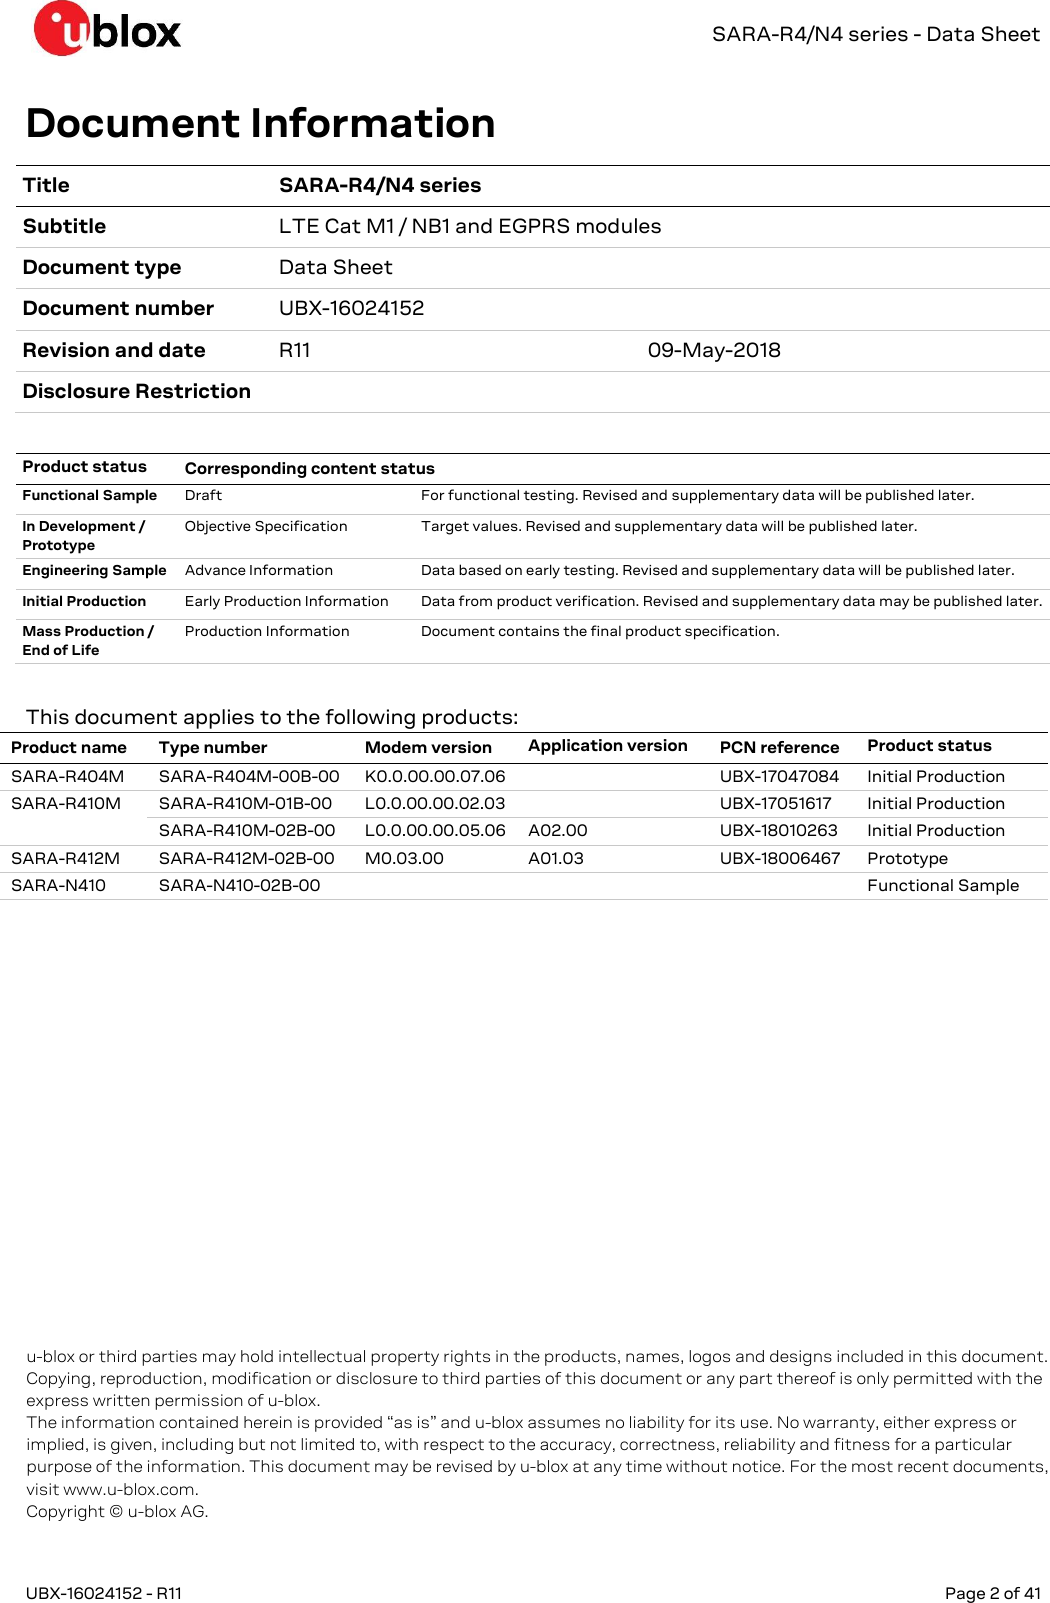   SARA-R4/N4 series - Data Sheet UBX-16024152 - R11   Page 2 of 41      Document Information Title SARA-R4/N4 series Subtitle LTE Cat M1 / NB1 and EGPRS modules Document type Data Sheet Document number UBX-16024152  Revision and date R11 09-May-2018 Disclosure Restriction    Product status Corresponding content status  Functional Sample Draft For functional testing. Revised and supplementary data will be published later. In Development / Prototype Objective Specification Target values. Revised and supplementary data will be published later. Engineering Sample Advance Information Data based on early testing. Revised and supplementary data will be published later. Initial Production Early Production Information Data from product verification. Revised and supplementary data may be published later. Mass Production /  End of Life Production Information Document contains the final product specification.  This document applies to the following products: Product name Type number Modem version Application version PCN reference Product status SARA-R404M SARA-R404M-00B-00 K0.0.00.00.07.06  UBX-17047084 Initial Production SARA-R410M SARA-R410M-01B-00 L0.0.00.00.02.03  UBX-17051617 Initial Production SARA-R410M-02B-00 L0.0.00.00.05.06 A02.00 UBX-18010263 Initial Production SARA-R412M SARA-R412M-02B-00 M0.03.00 A01.03 UBX-18006467 Prototype SARA-N410 SARA-N410-02B-00    Functional Sample   u-blox or third parties may hold intellectual property rights in the products, names, logos and designs included in this document. Copying, reproduction, modification or disclosure to third parties of this document or any part thereof is only permitted with the express written permission of u-blox. The information contained herein is provided “as is” and u-blox assumes no liability for its use. No warranty, either express or implied, is given, including but not limited to, with respect to the accuracy, correctness, reliability and fitness for a particular purpose of the information. This document may be revised by u-blox at any time without notice. For the most recent documents, visit www.u-blox.com.  Copyright © u-blox AG. 